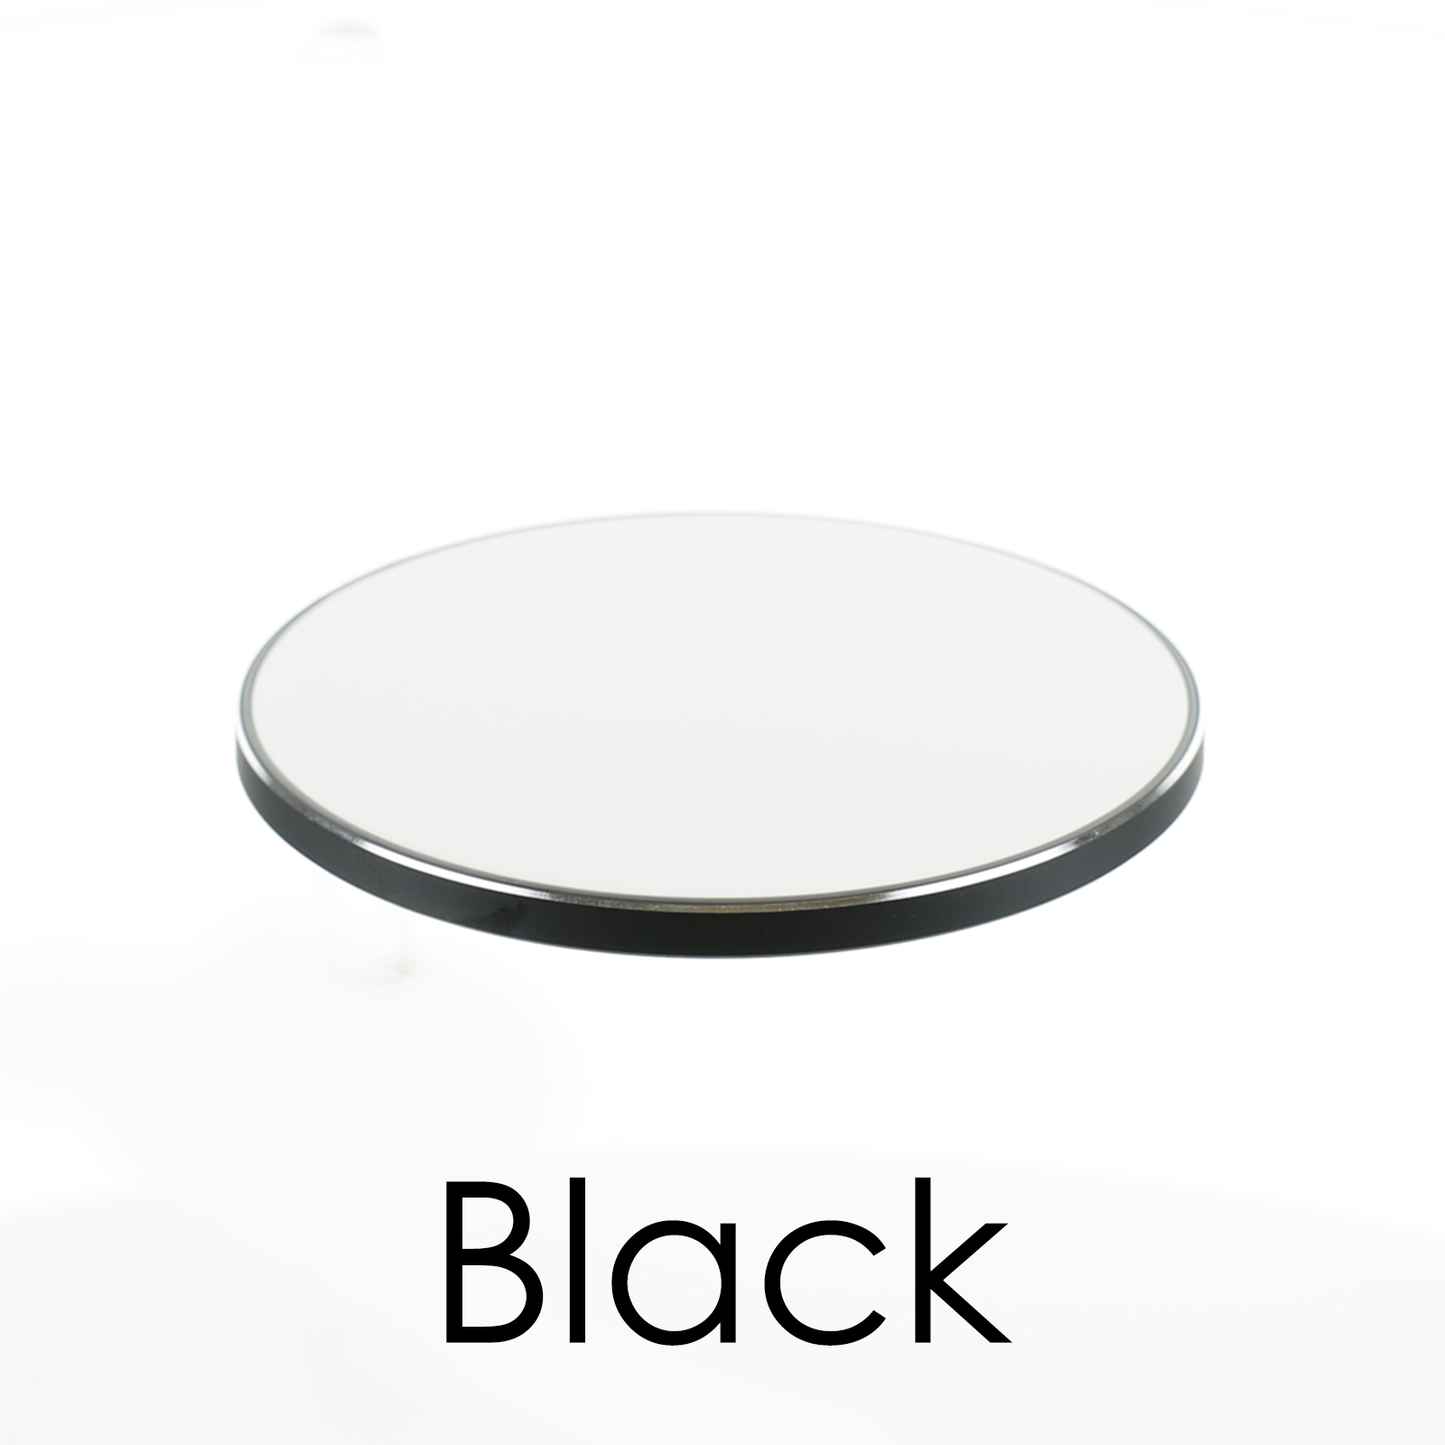 Personalised Wireless Charger with Stylish Text and Heart on Black Marble